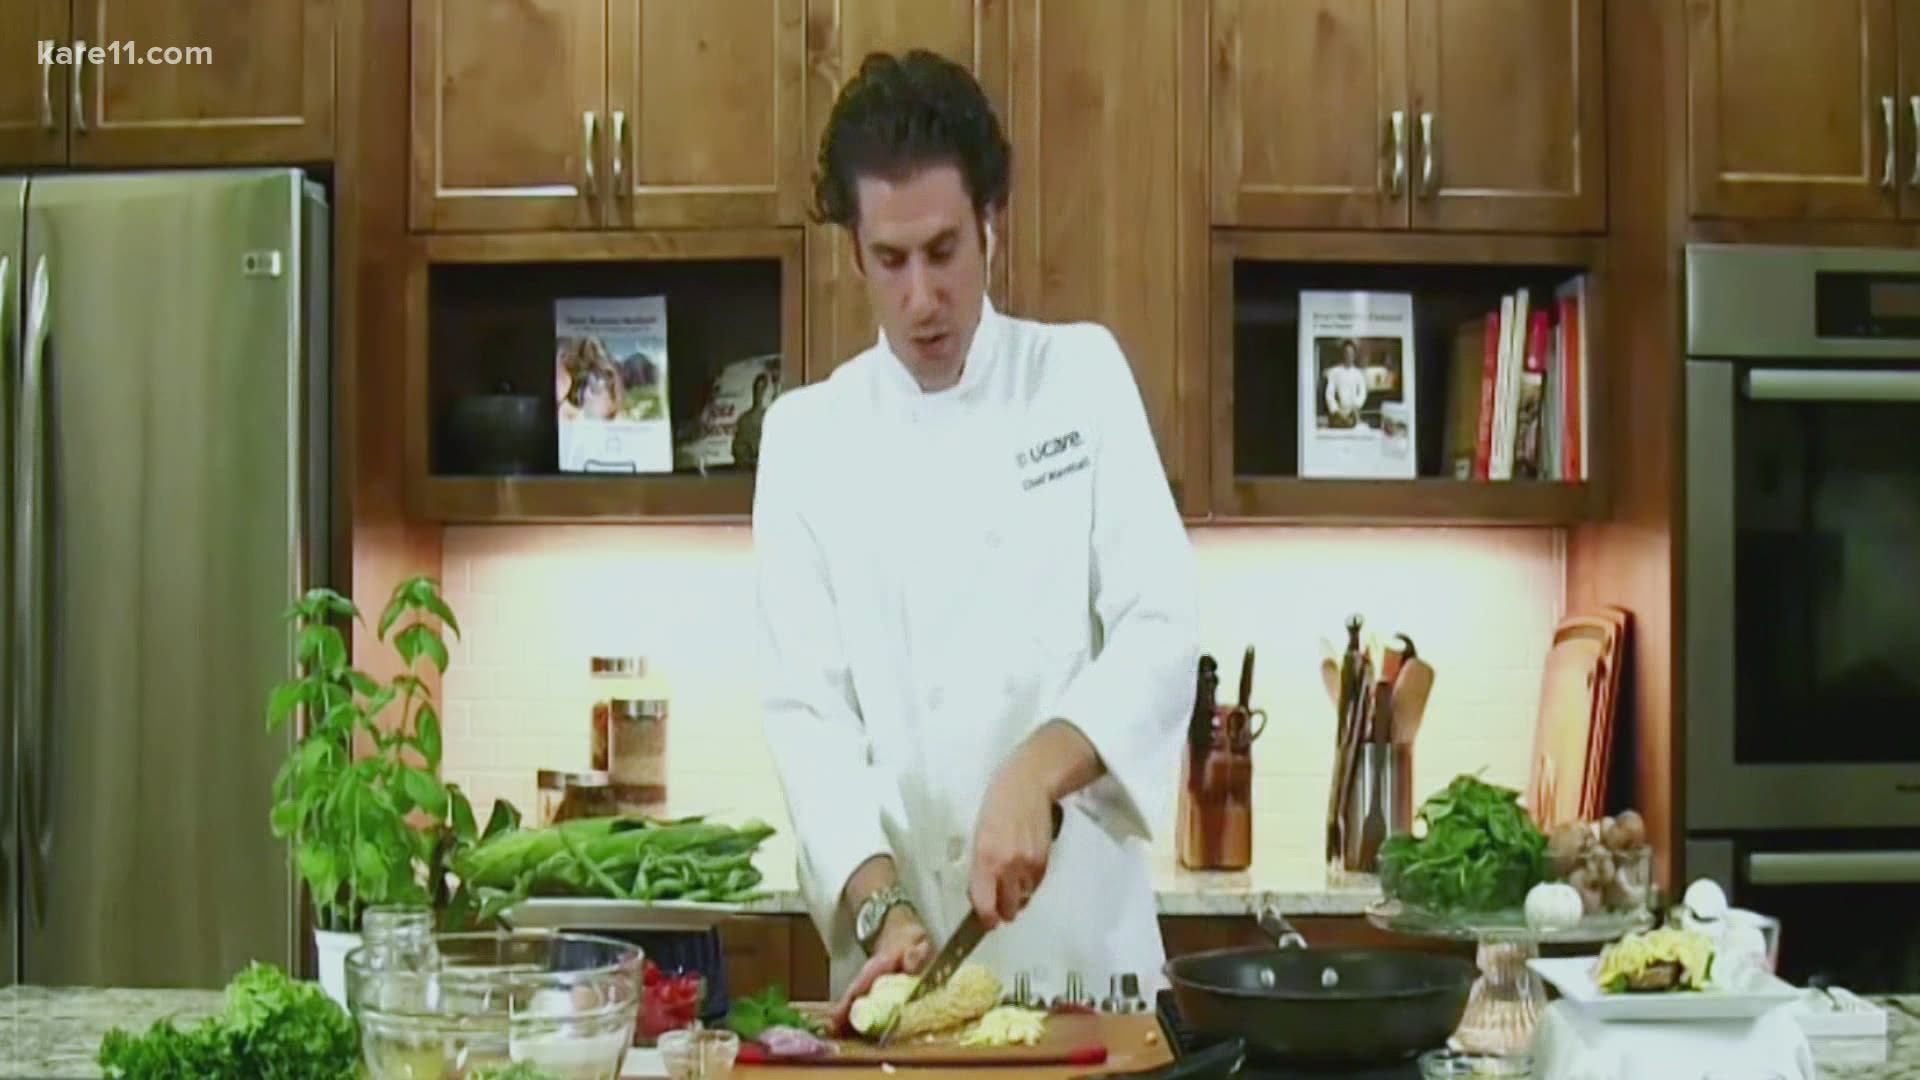 UCare Nutritional Wellness Chef Marshall O'Brien shares recipes for Sweet Corn, Tomato and Green Bean Summer Salad and a Parmesan Spinach Mushroom Omelet